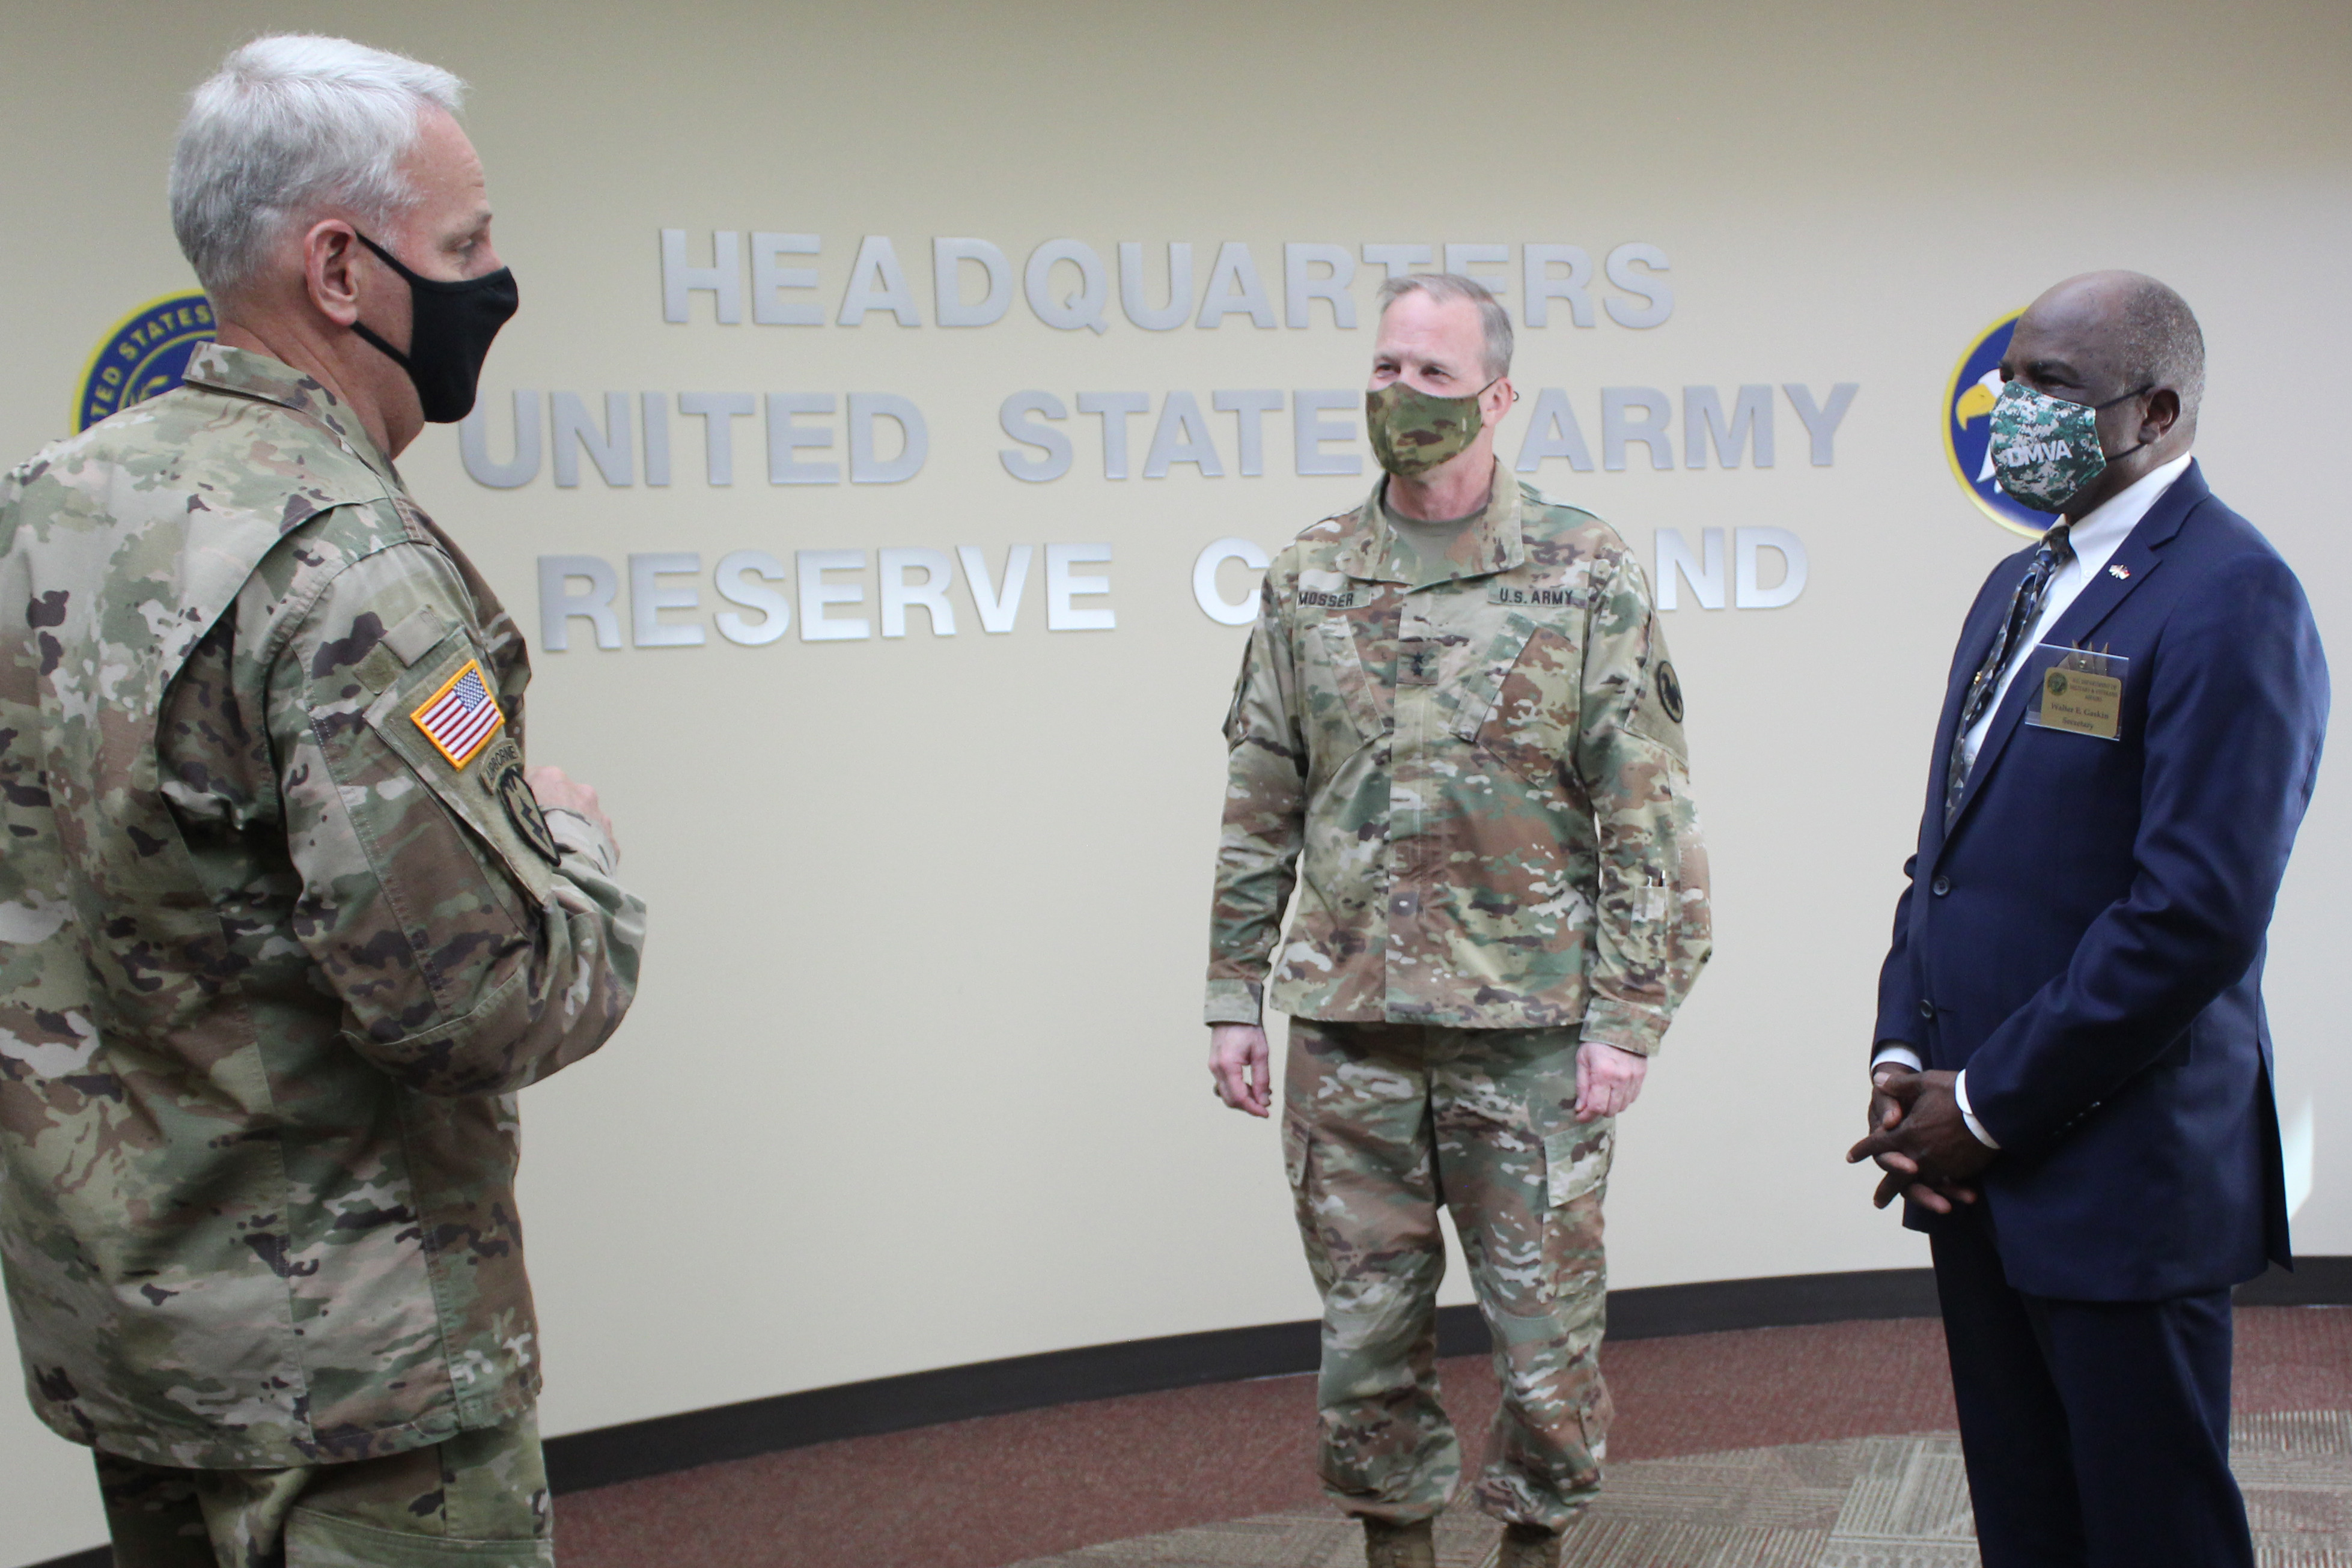 Spc. John Mundey (left), 2018 Army Reserve Soldier of the Year